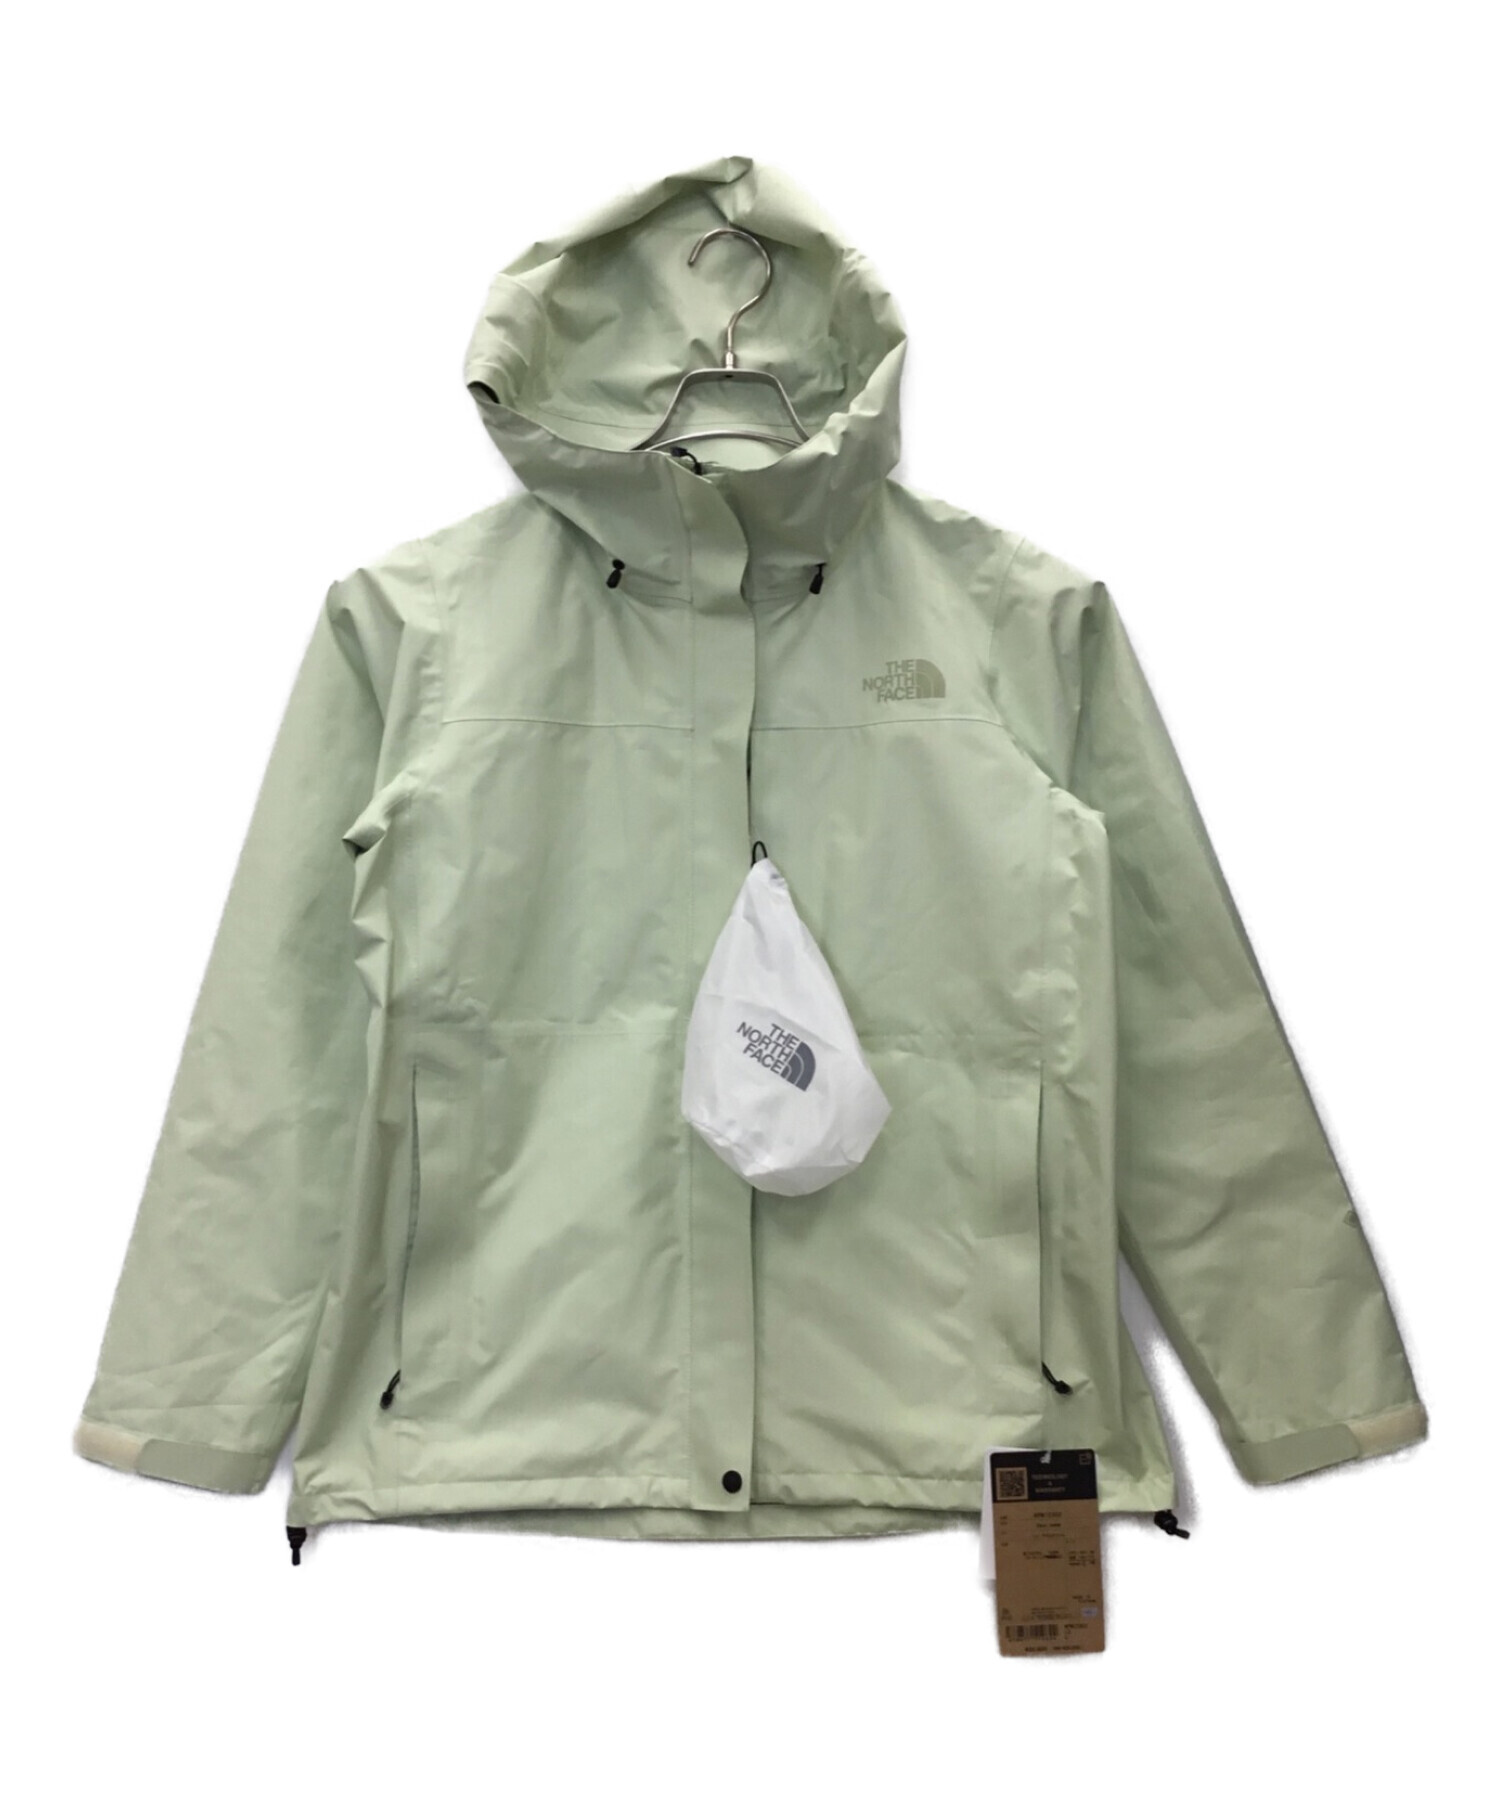 THE NORTH FACE(ザノースフェイス) CLOUD JACKET